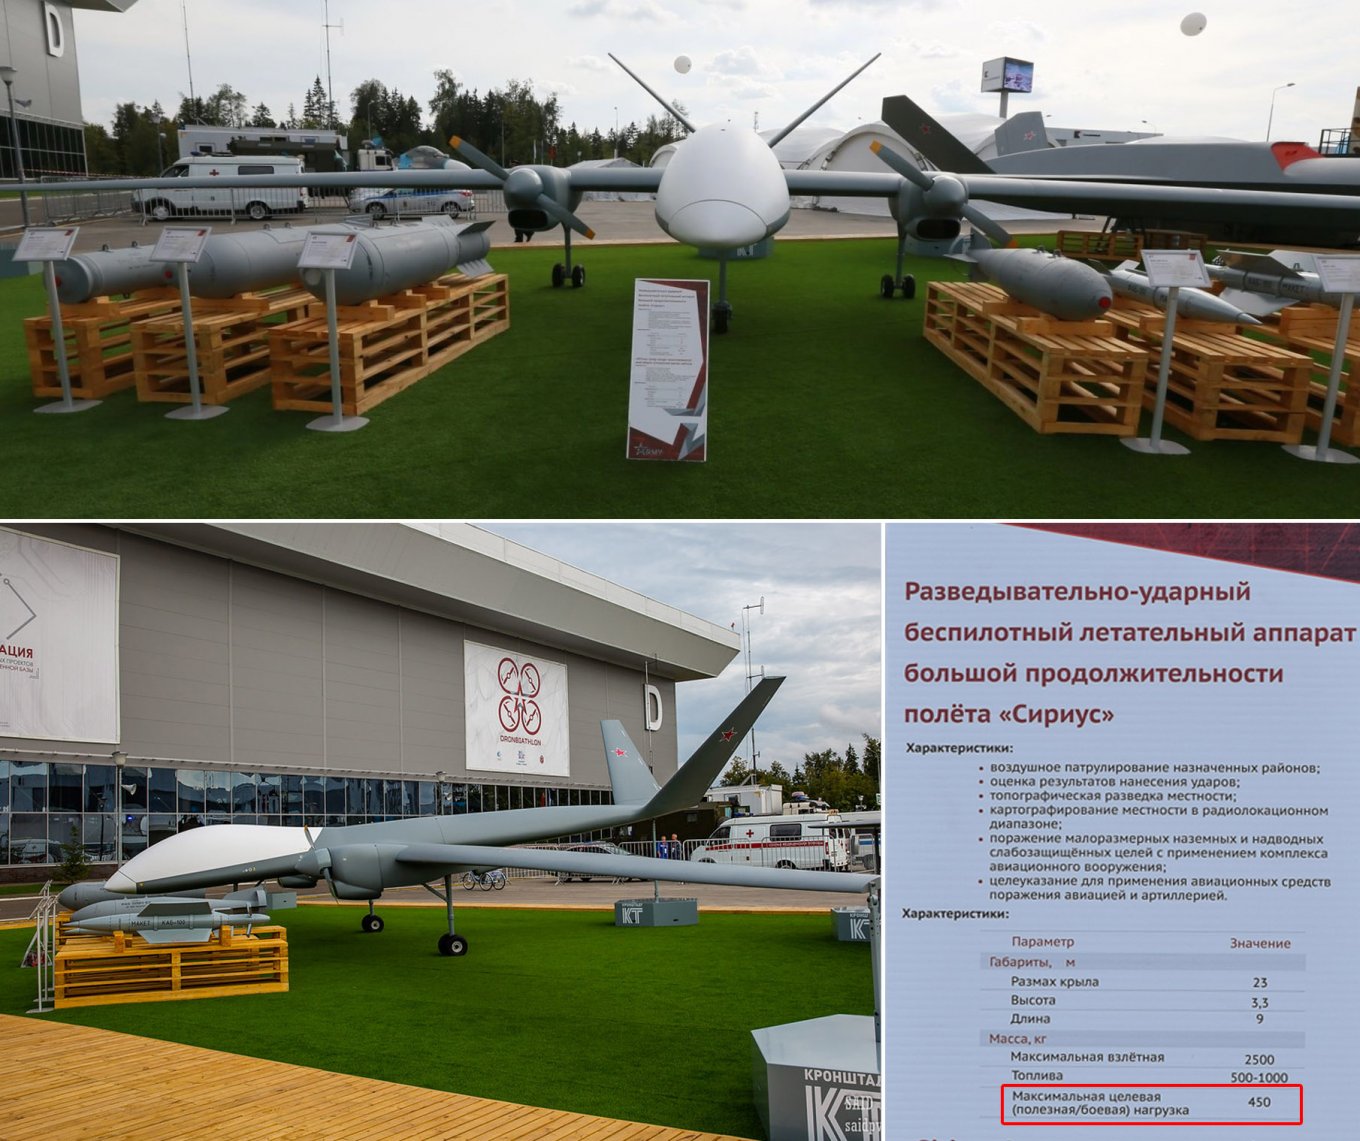 The Sirius UAV, In russia, They Took Their the Sirius UAV Into the Air for the First Time, Defense Express